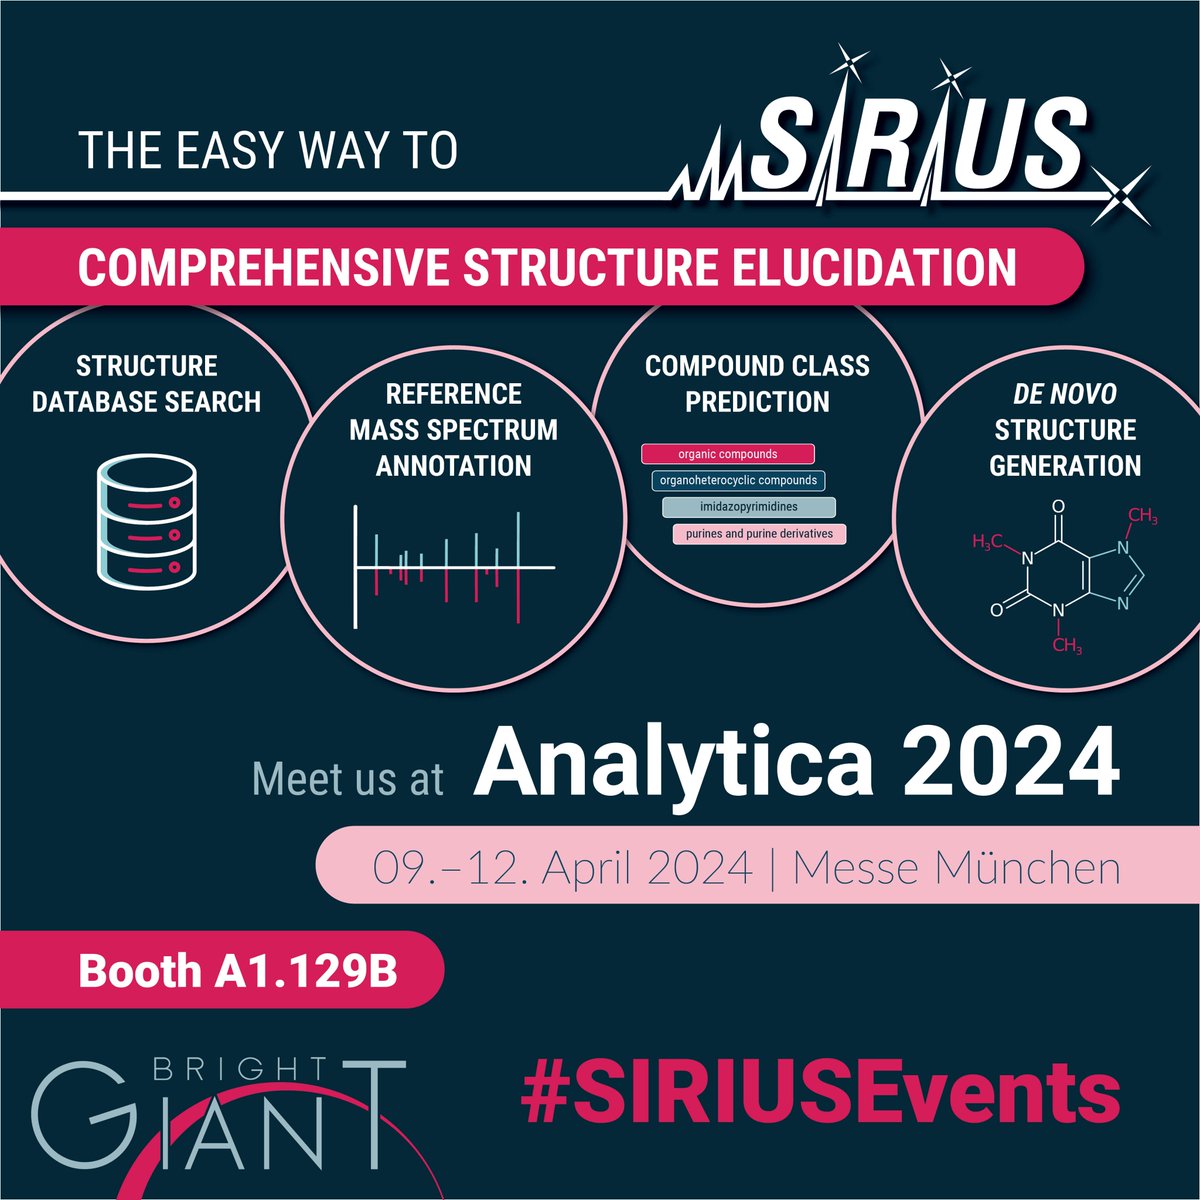 Join us at @analyticaFair 2024: As a leader in #Untargeted #SmallMolecule #MassSpectrometry, we're excited to showcase our identification software #SIRIUS_MS.

Visit us at Booth A1.129B

#Analytica2024 #SIRIUSEvents #StructureElucidation #metabolomics #machinelearning #MSSoftware